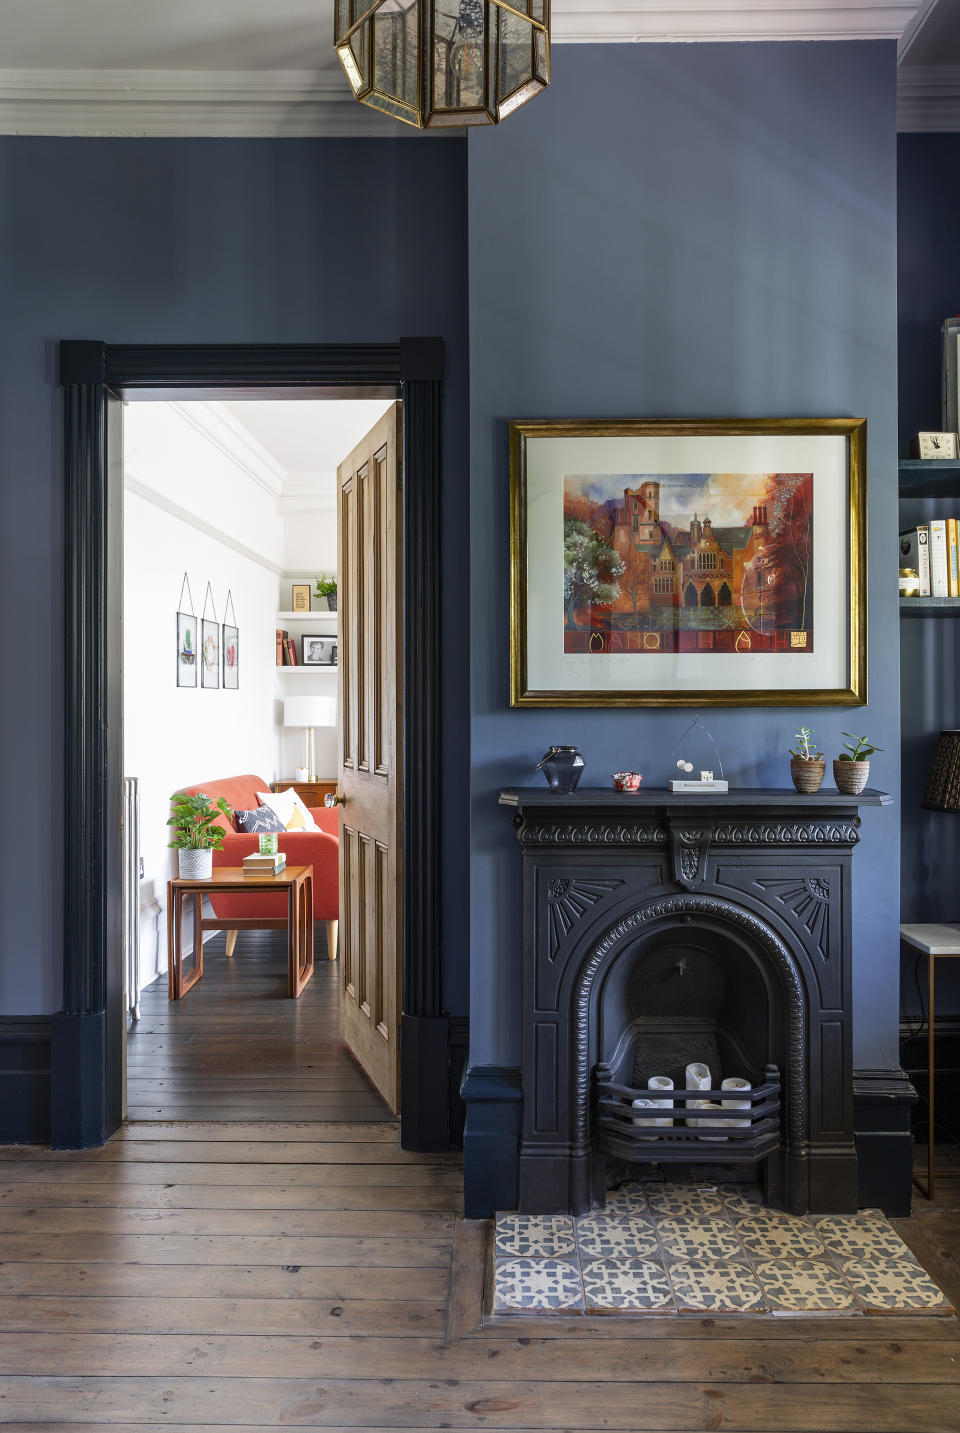 <p> 'No more accent walls in 2021!' says Kate Lester emphatically. 'If you are going to paint a color, go all in! I have been literally saying this for years, but maybe 2021 is the year everyone will stop being silly and listen to me.' </p>